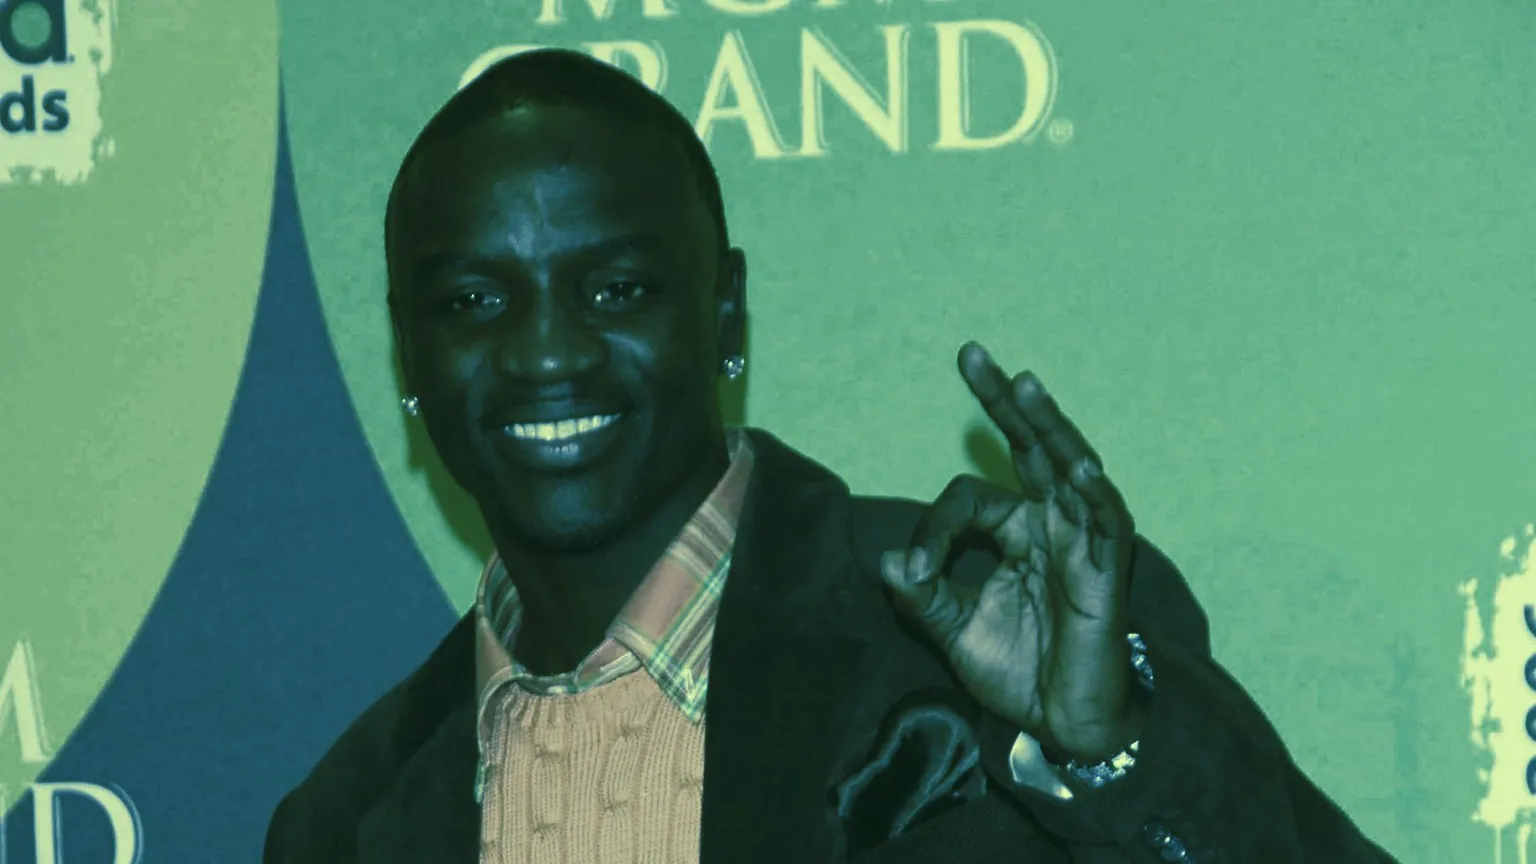 This week, Akon announced his expansion into East Africa, Libra “pivoted” its business model, Binance opened up for P2P trading in Venezuela, and China’s digital yuan kicked into action. Image: Shutterstock